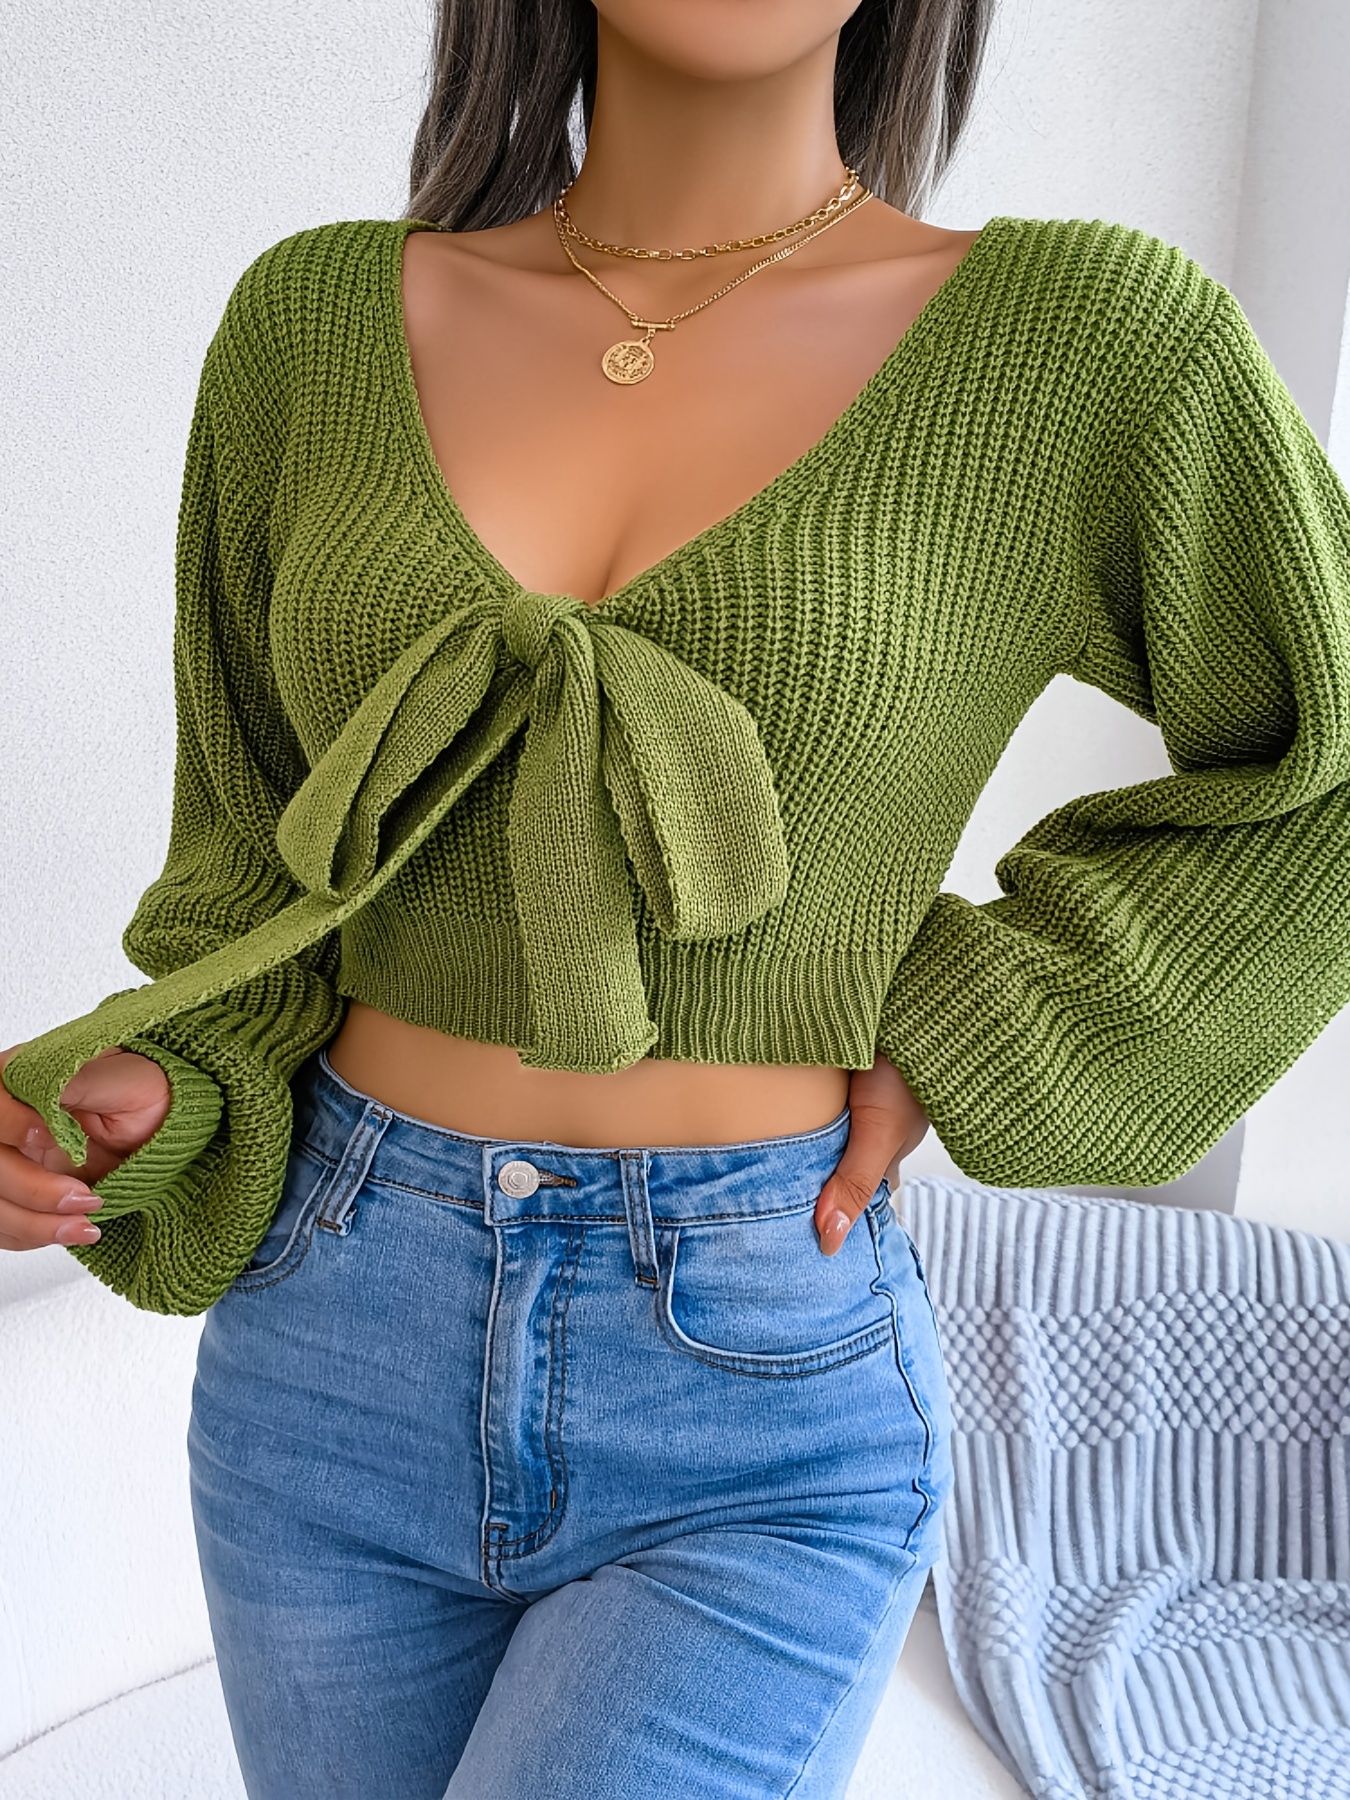 Knit Crop Top for Women Long Lantern Sleeve Sexy Sweetheart Neckline  Sweater Green at  Women's Clothing store